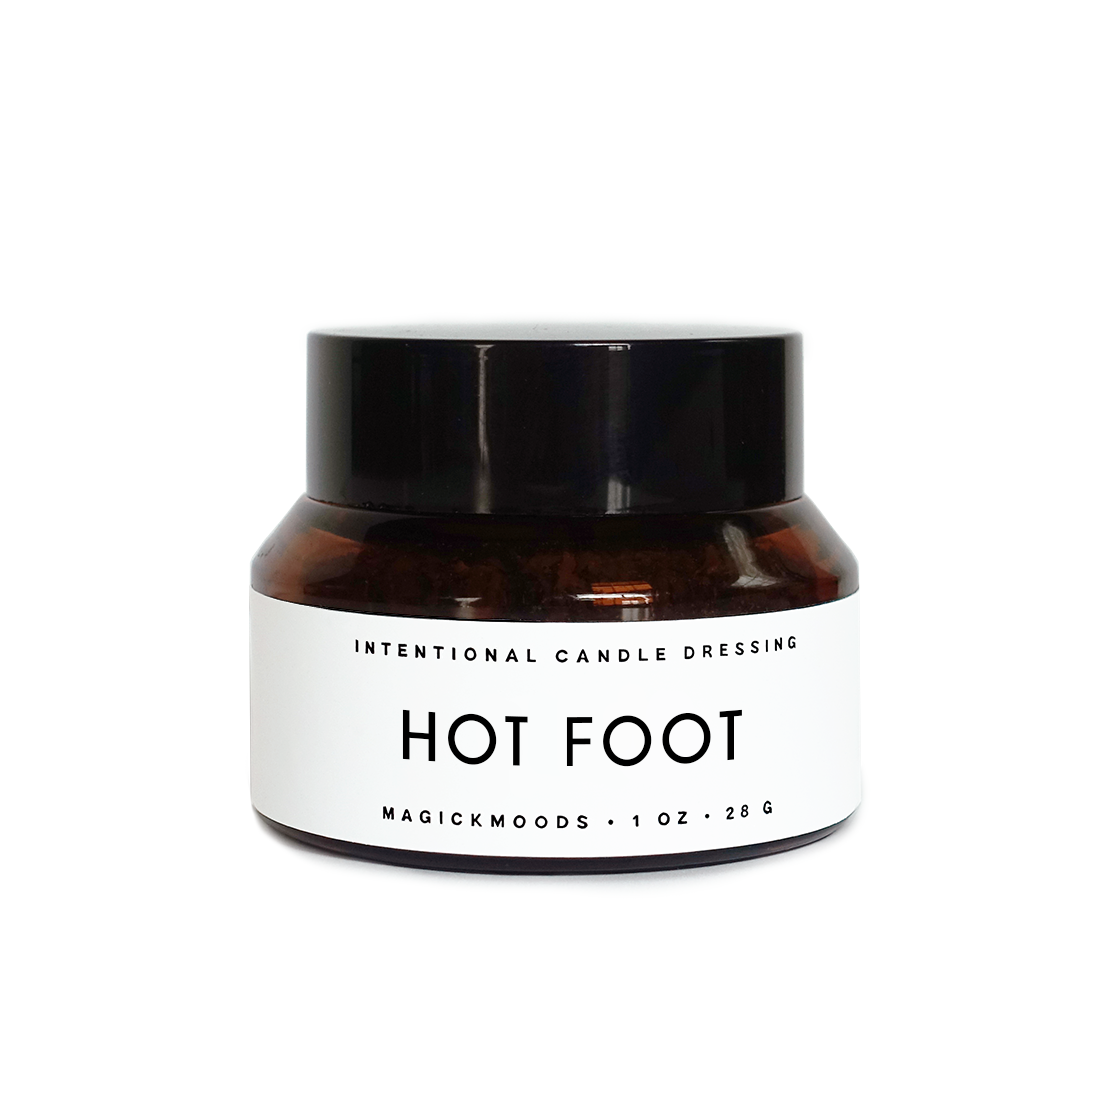 Hot Foot Candle Dressing